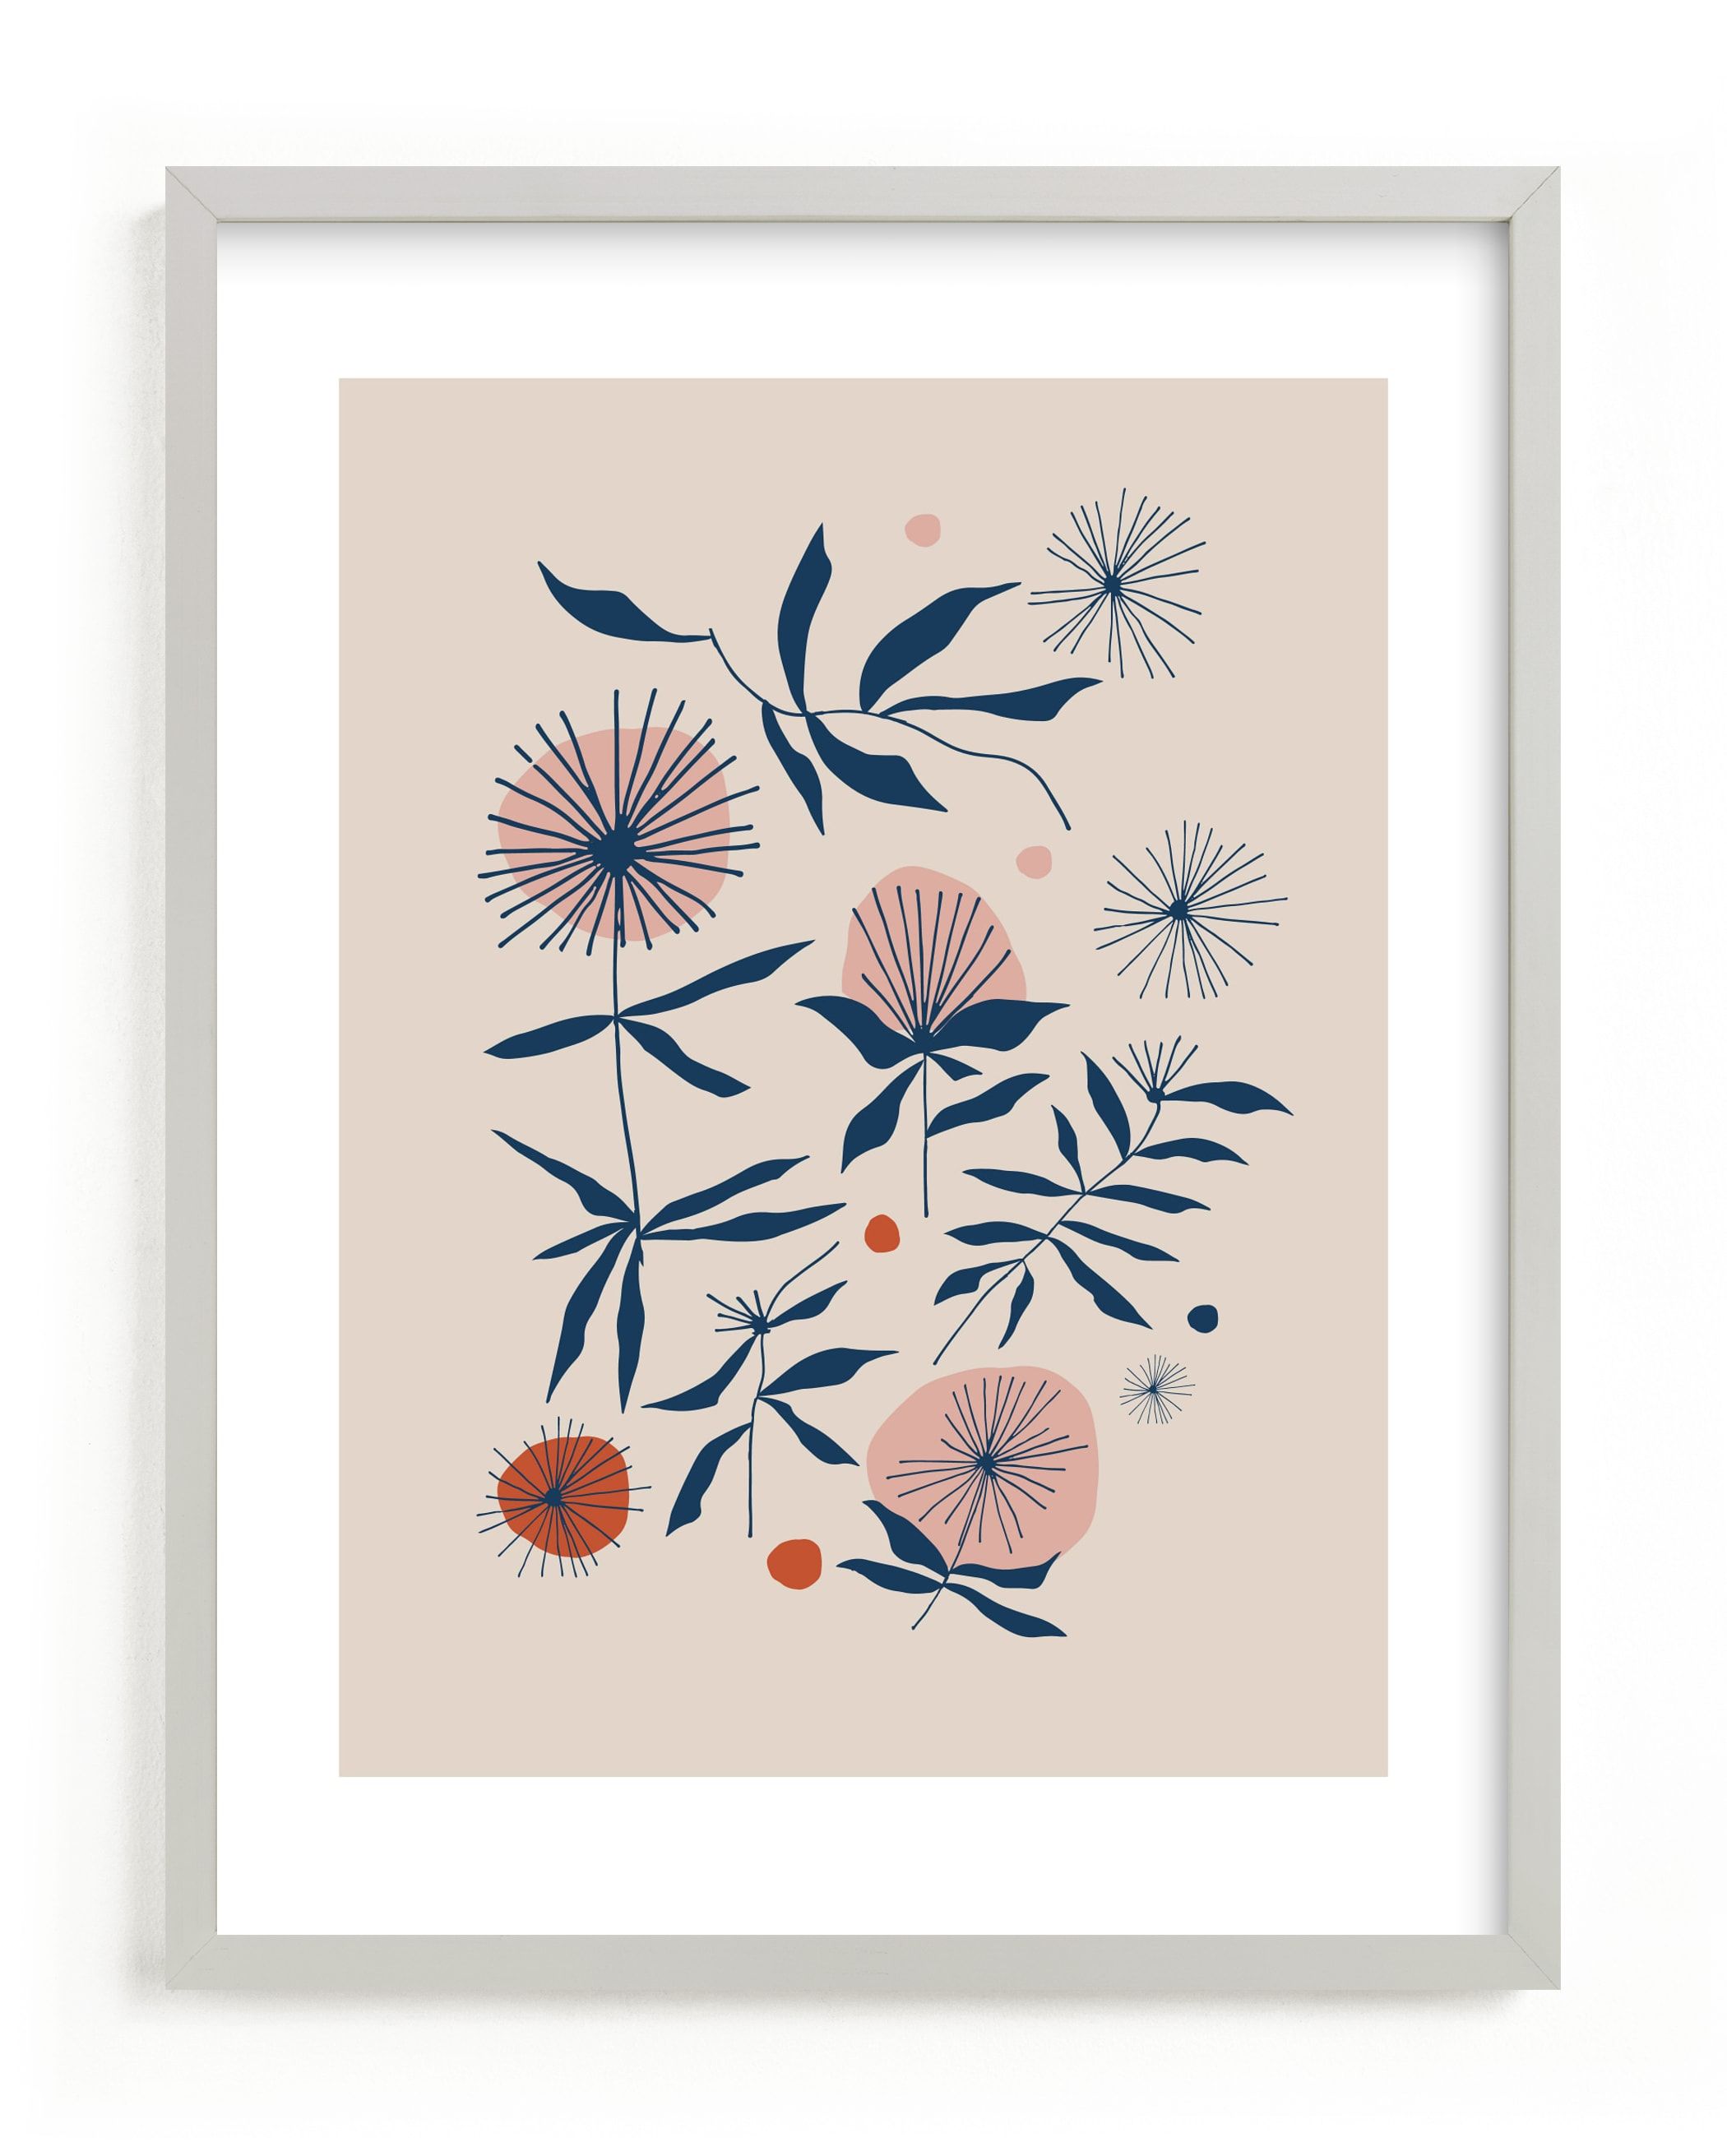 "Vintage Floral Set I" - Painting Limited Edition Art Print by Kate Capone. | Minted